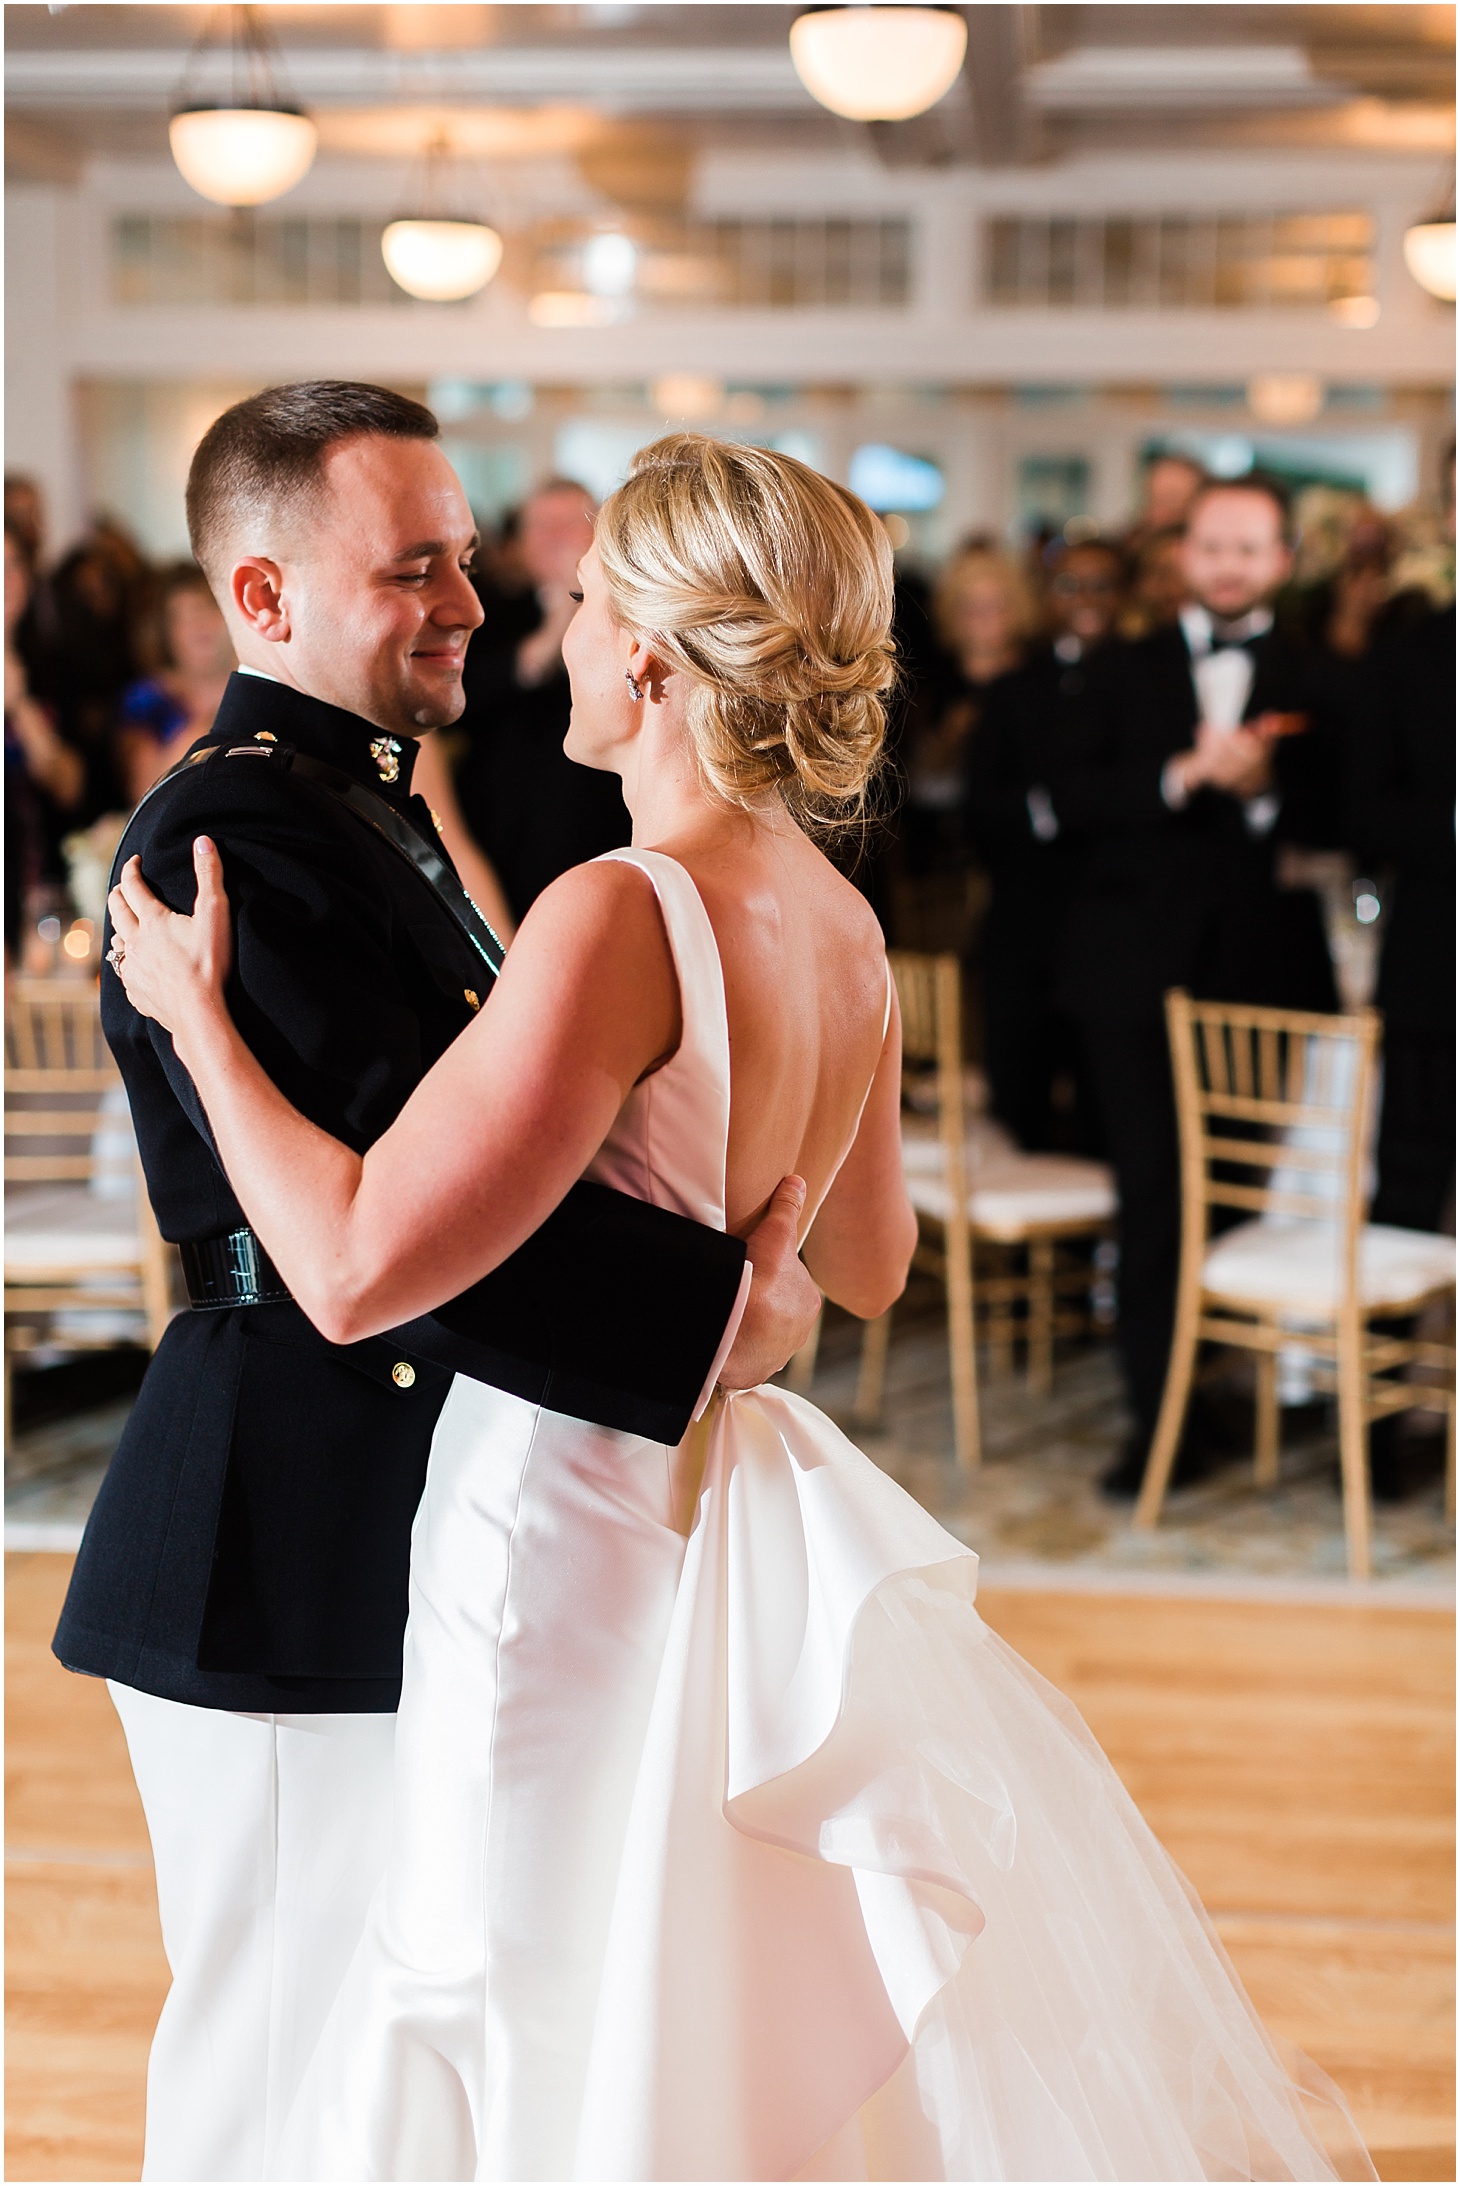 First Dance at Gibson Island Club Wedding Reception in Annapolis, MD | Southern Magnolia Wedding at the Naval Academy and Gibson Island Club | Sarah Bradshaw Photography